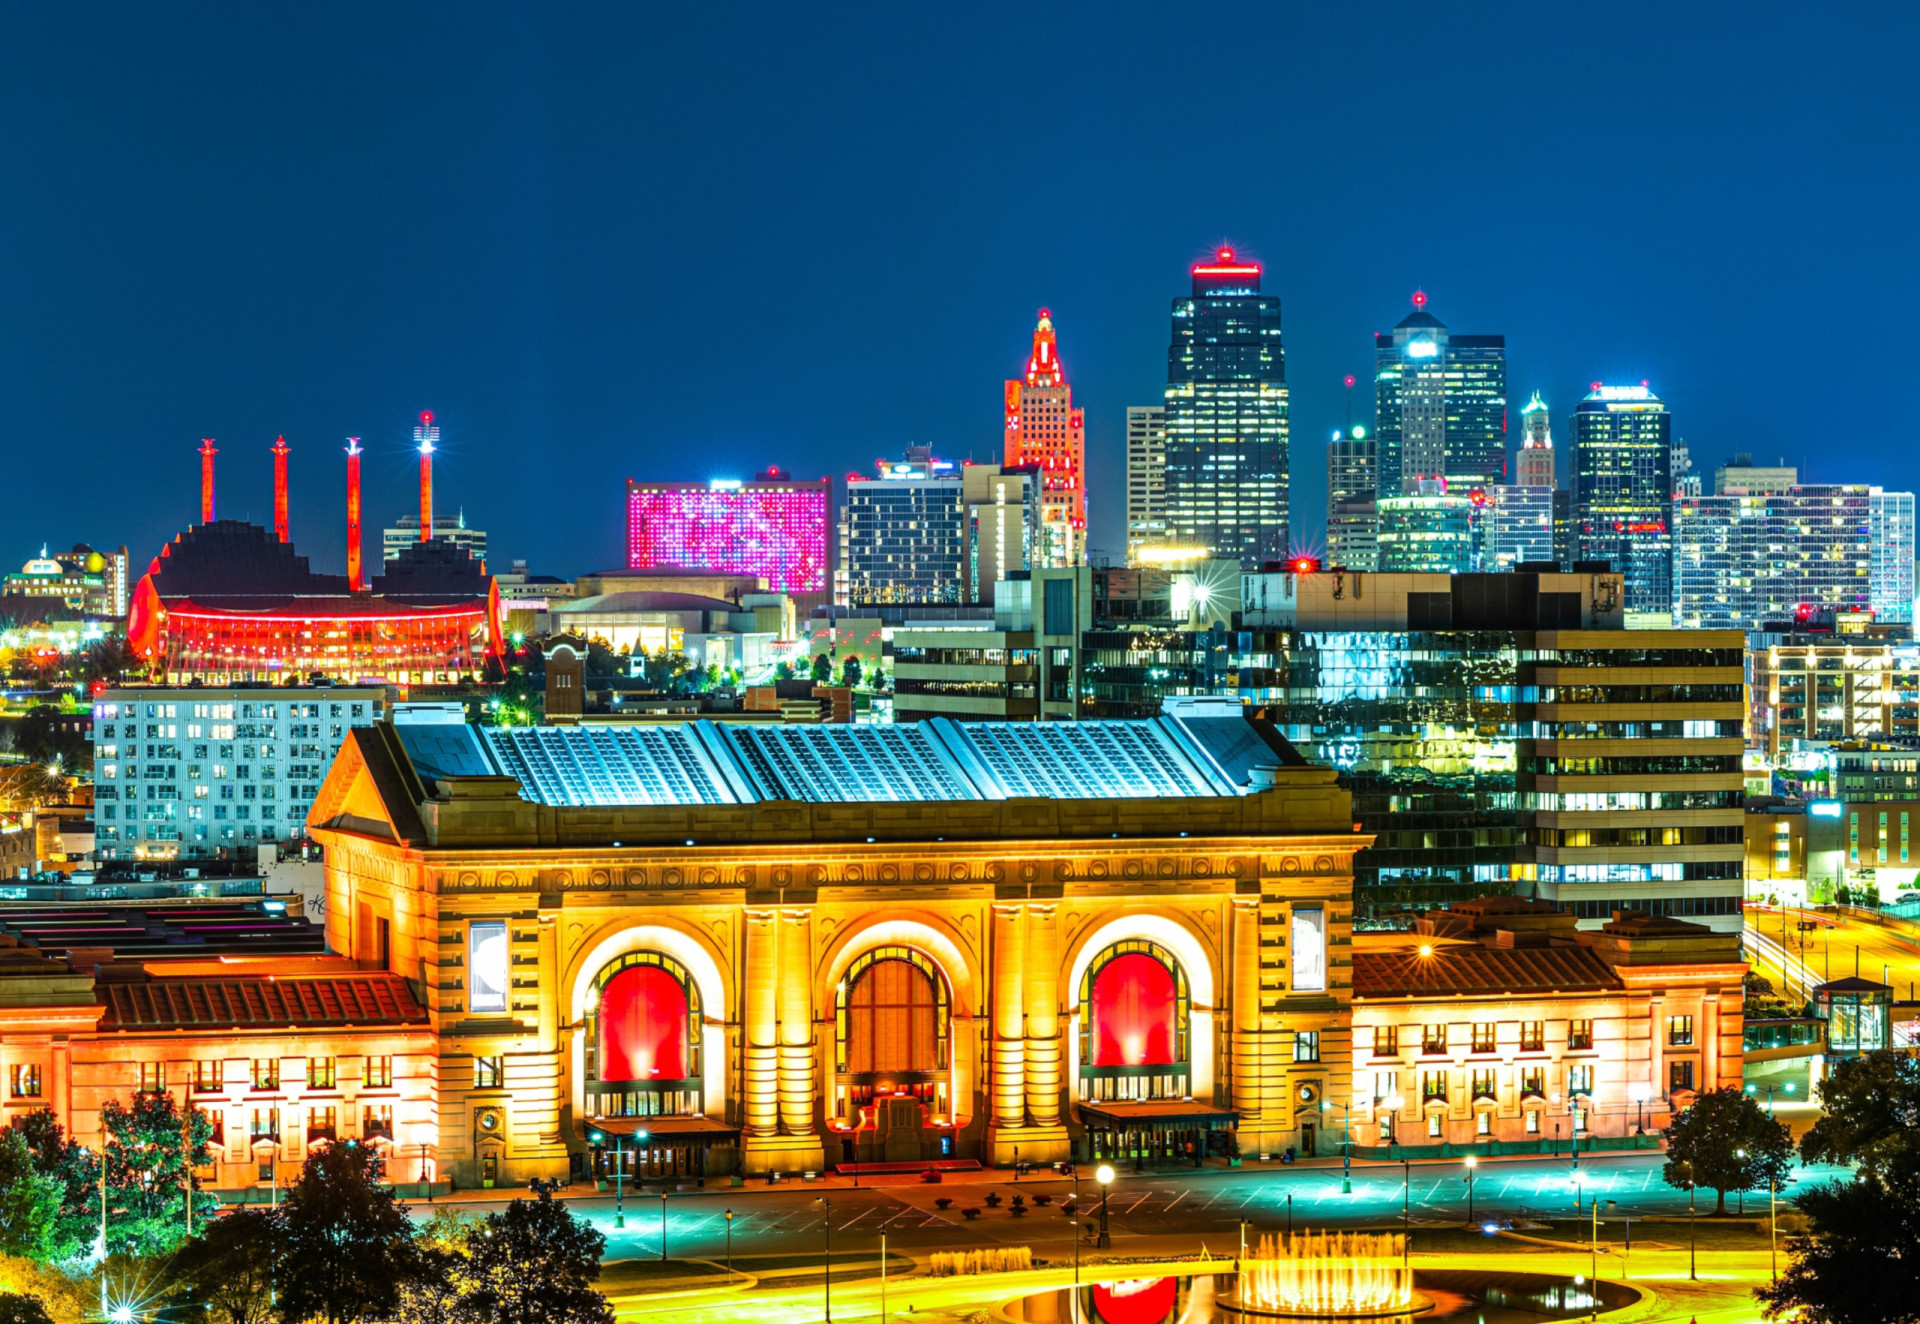 <p>Kansas City, Missouri, is currently in the celebrity spotlight after the pairing of Taylor Swift and Travis Kelce, tight end for the Kansas City Chiefs. In March 2024, the city will celebrate the opening of the first-ever purpose-built stadium for women's pro sports. Visitors can also look forward to a string of new hotel and shopping facilities, including the brand new Rock Island Bridge entertainment complex.</p><p>You may also like:<a href="https://www.starsinsider.com/n/411996?utm_source=msn.com&utm_medium=display&utm_campaign=referral_description&utm_content=636762en-en_selected"> Bruce Lee: from martial artist to Hollywood star</a></p>